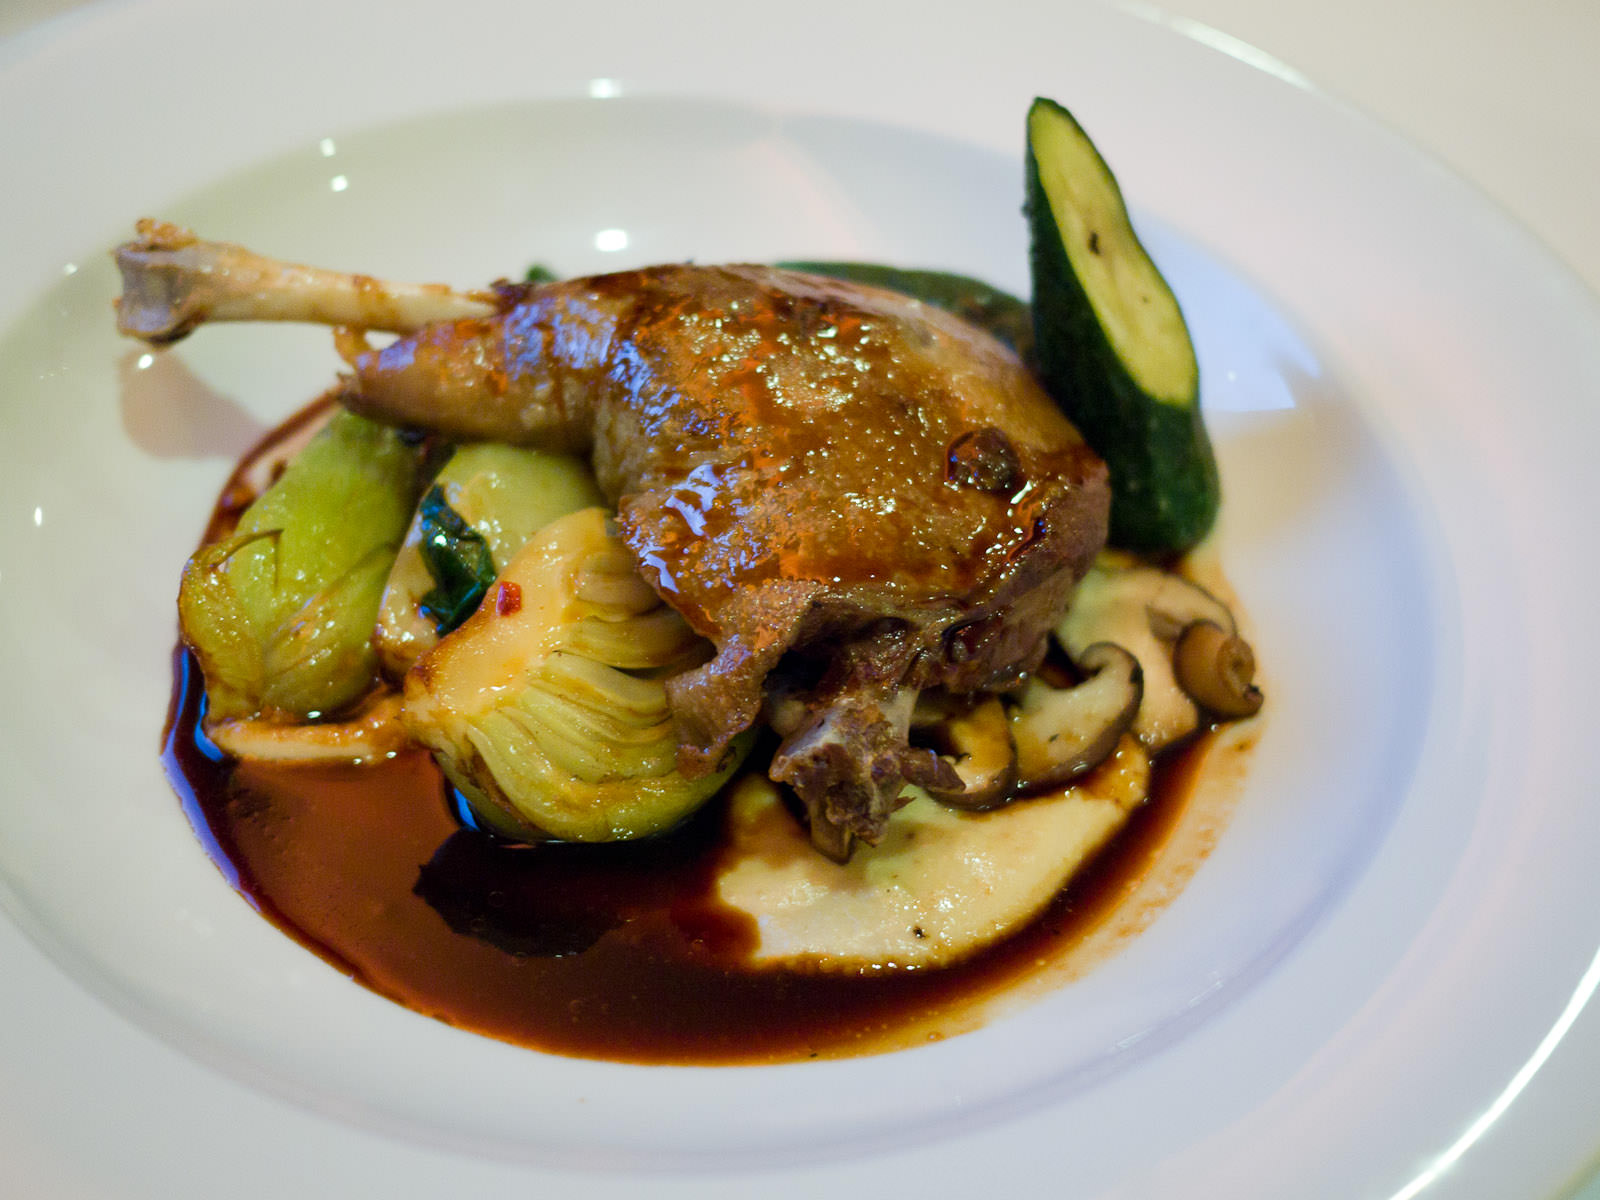 Confit of duck leg, macadamia and celeriac puree, baby boy choy, courgettes, shitake mushrooms, spicy plum jus